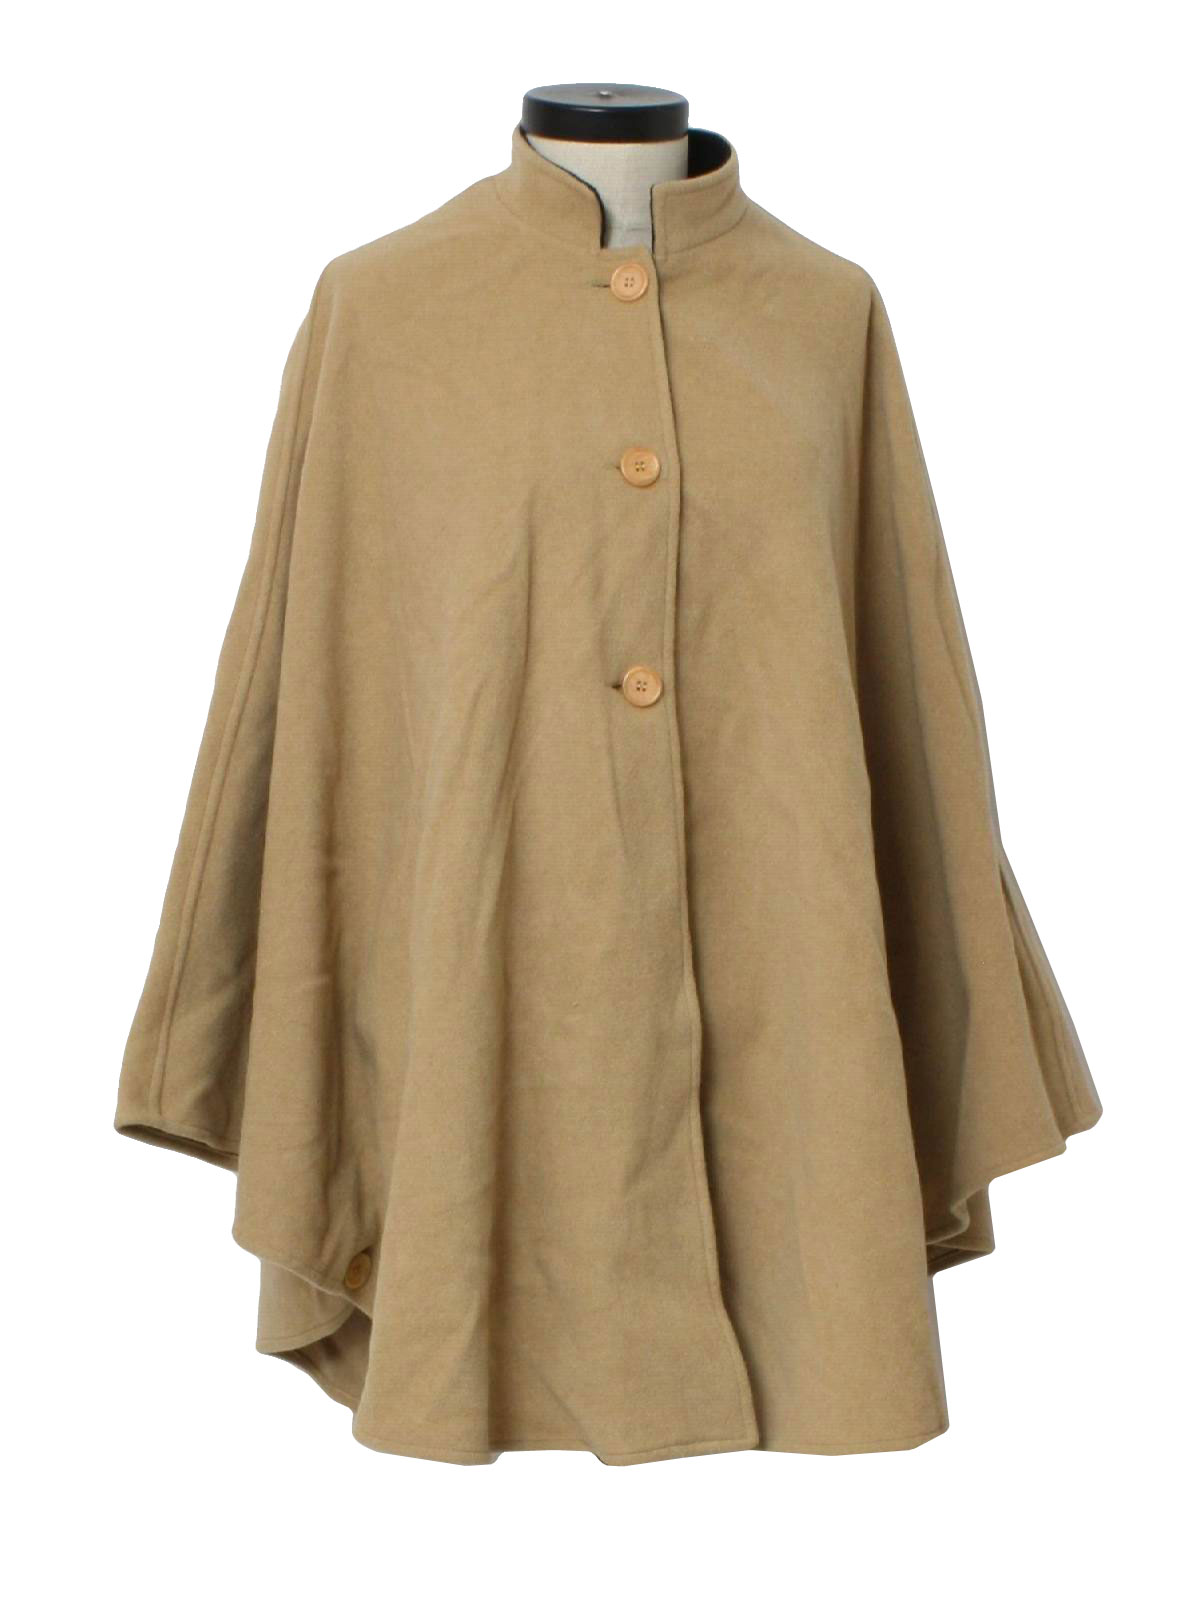 Retro 70s Jacket (Wool and Cashmere Blend) : 70s -Wool and Cashmere